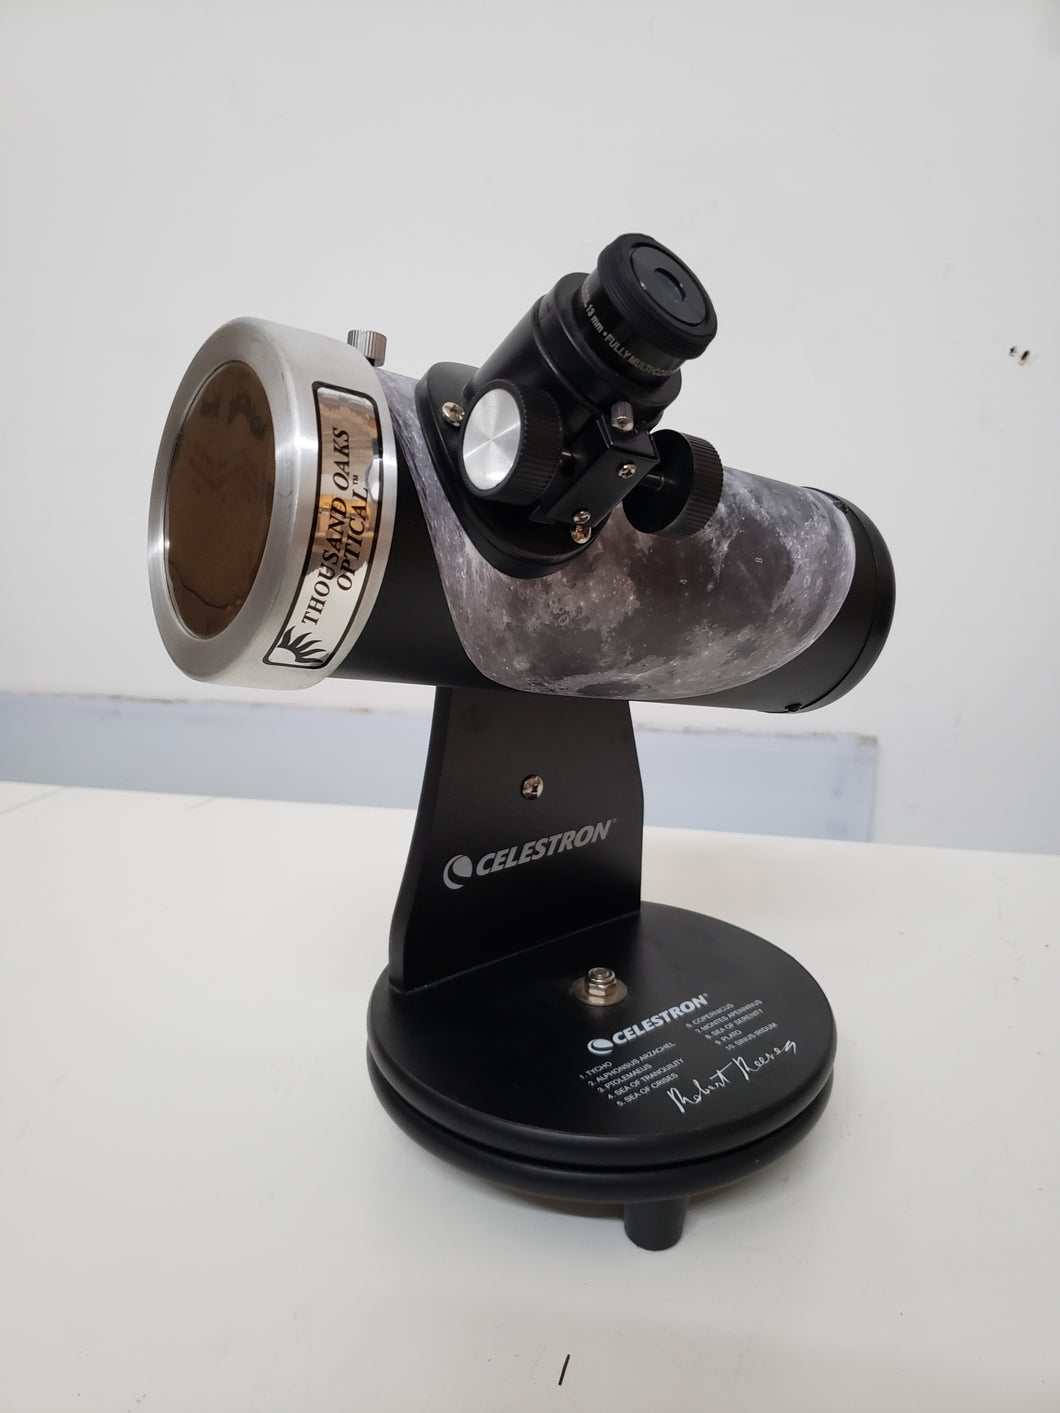 USED Firstscope Signature Series Moon by Robert Reeves (22016) with SolarLite White Light Solar Filter (S-4000)